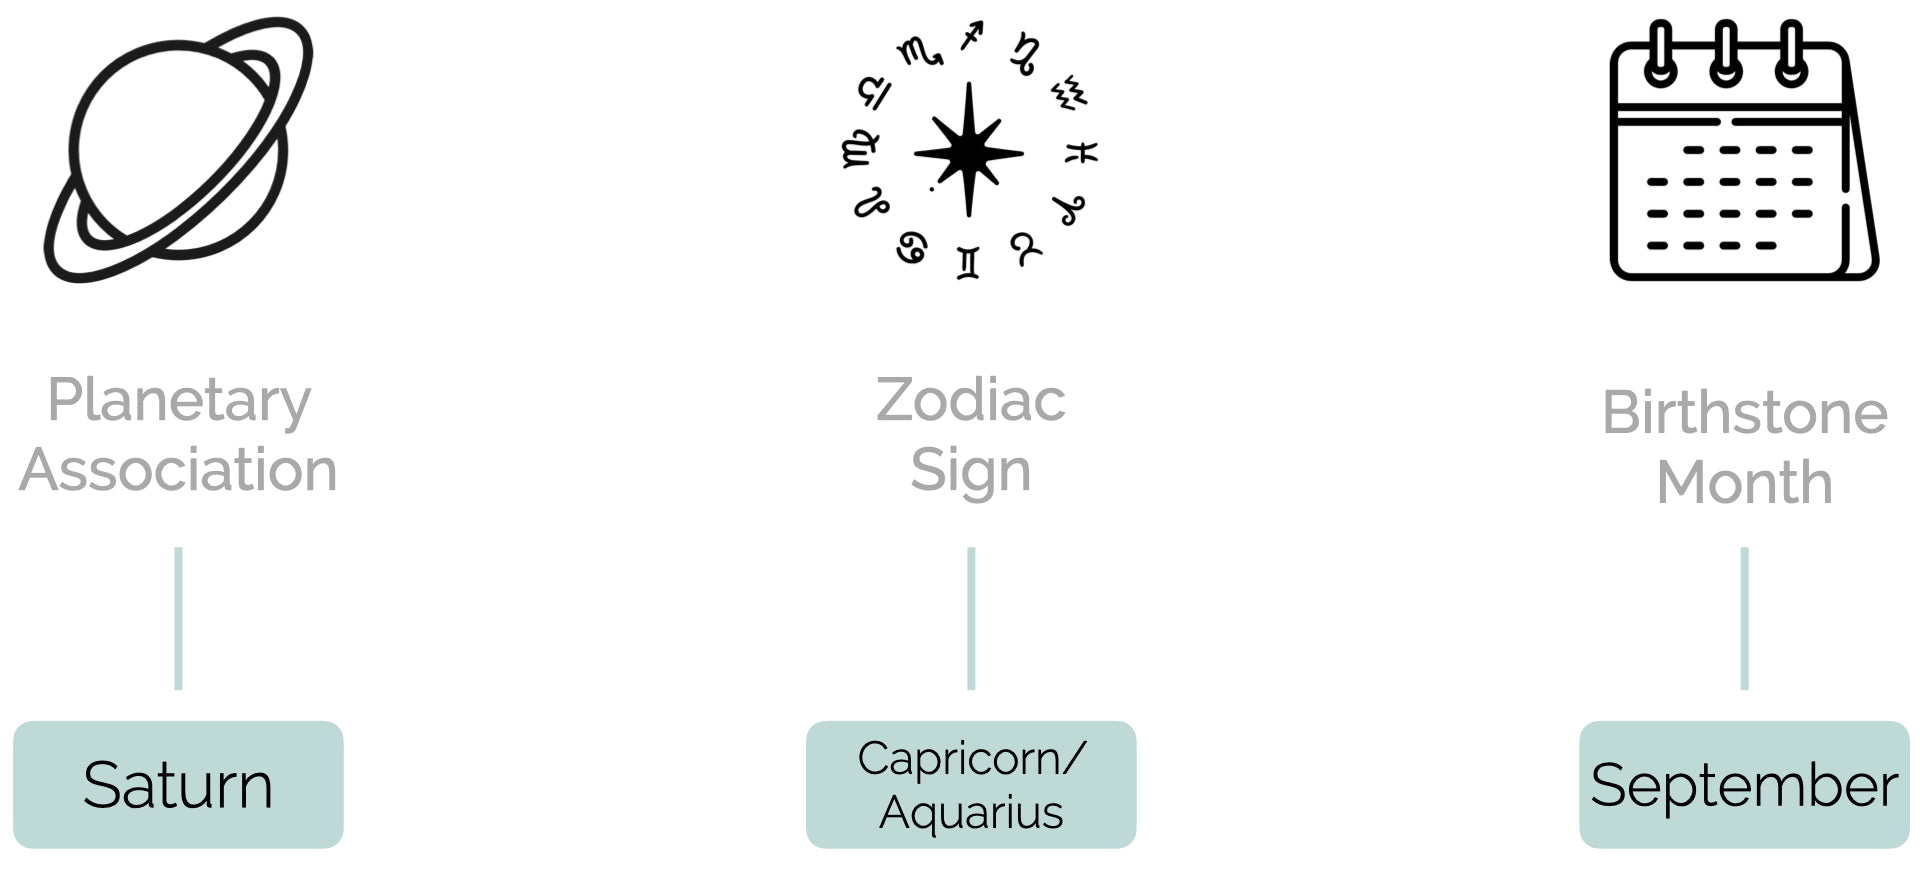 Diagram representing the planetary, zodiac, and birthstone month associations of a blue sapphire (neelam)